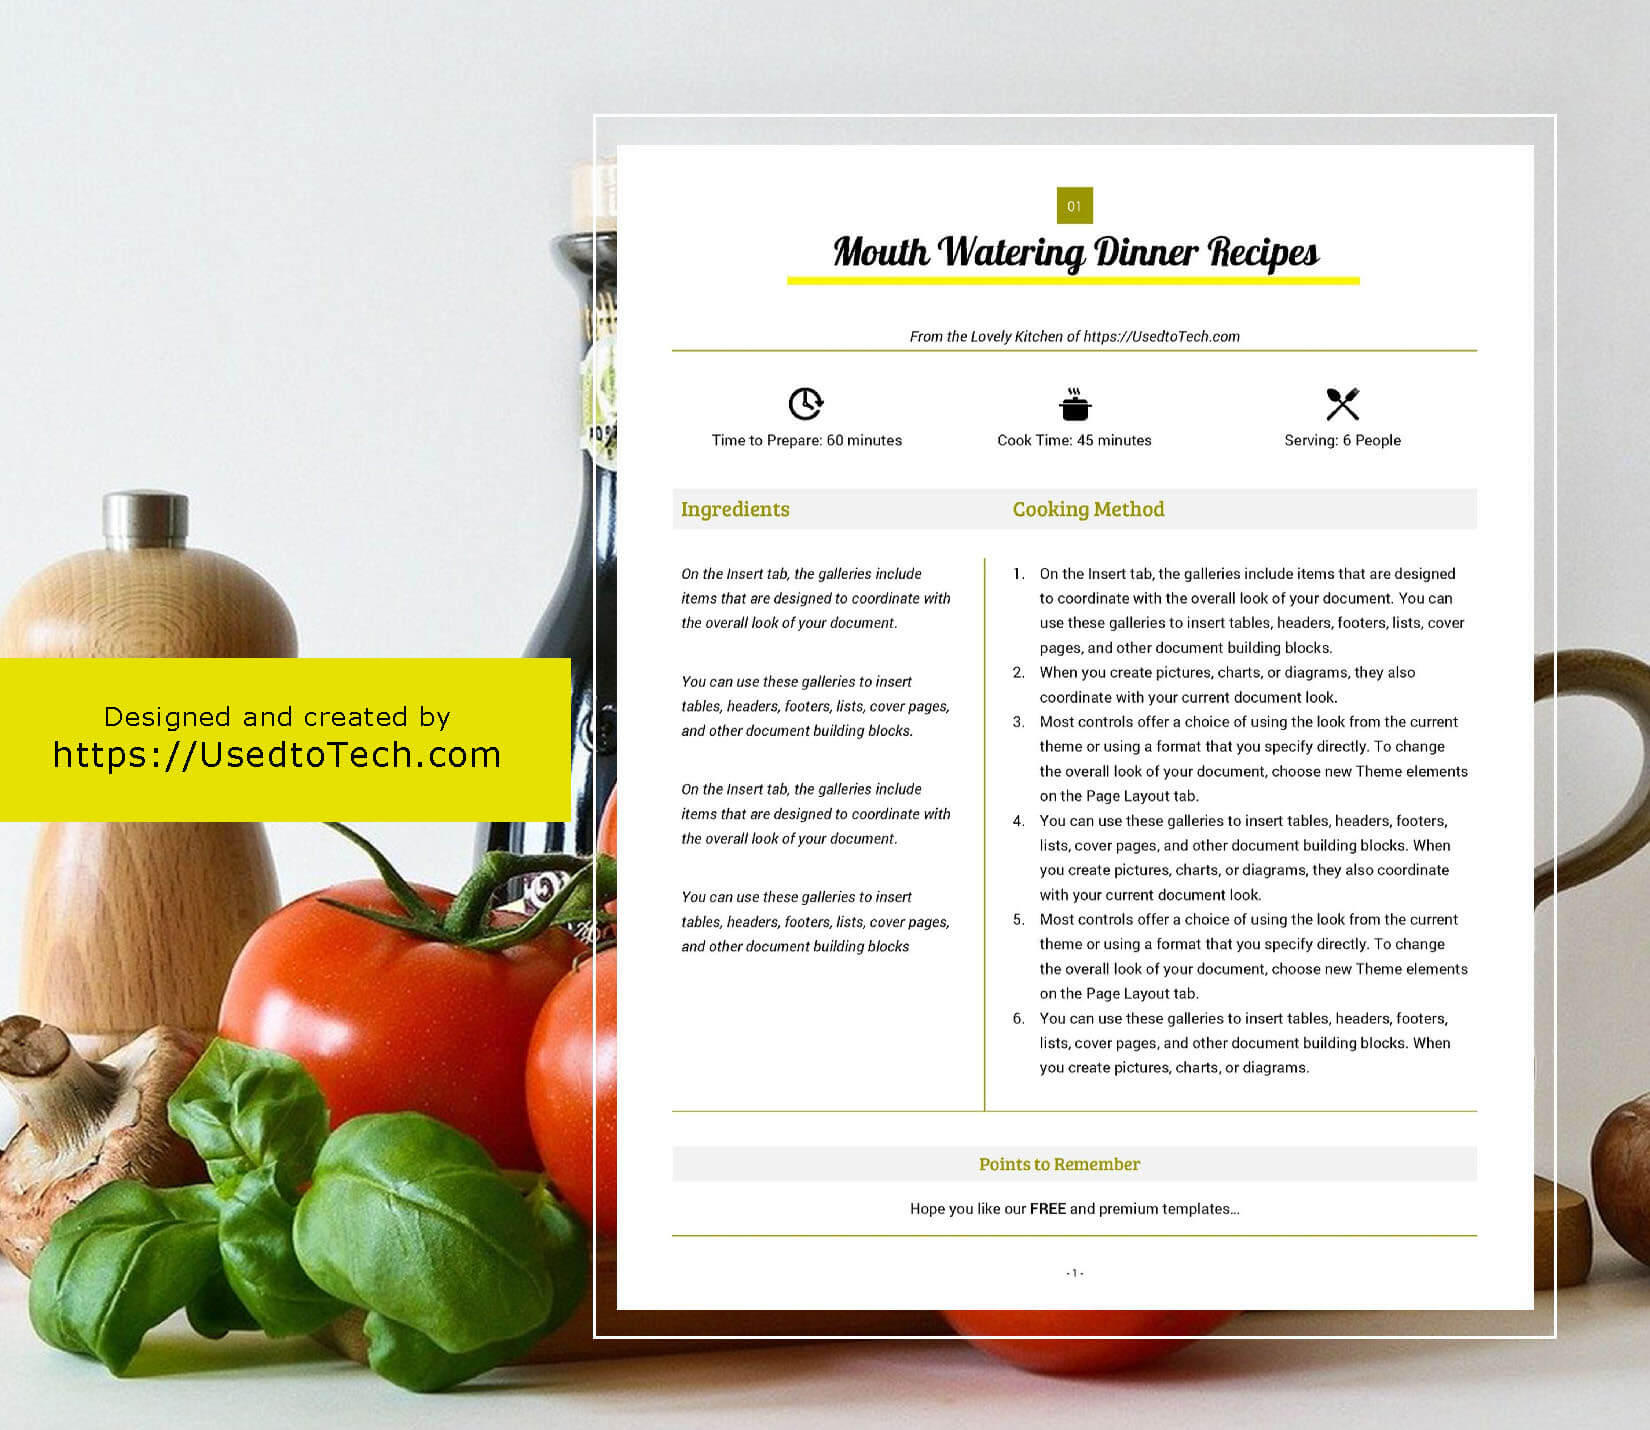 Best Looking Full Page Recipe Card In Microsoft Word – Used For Free Recipe Card Templates For Microsoft Word